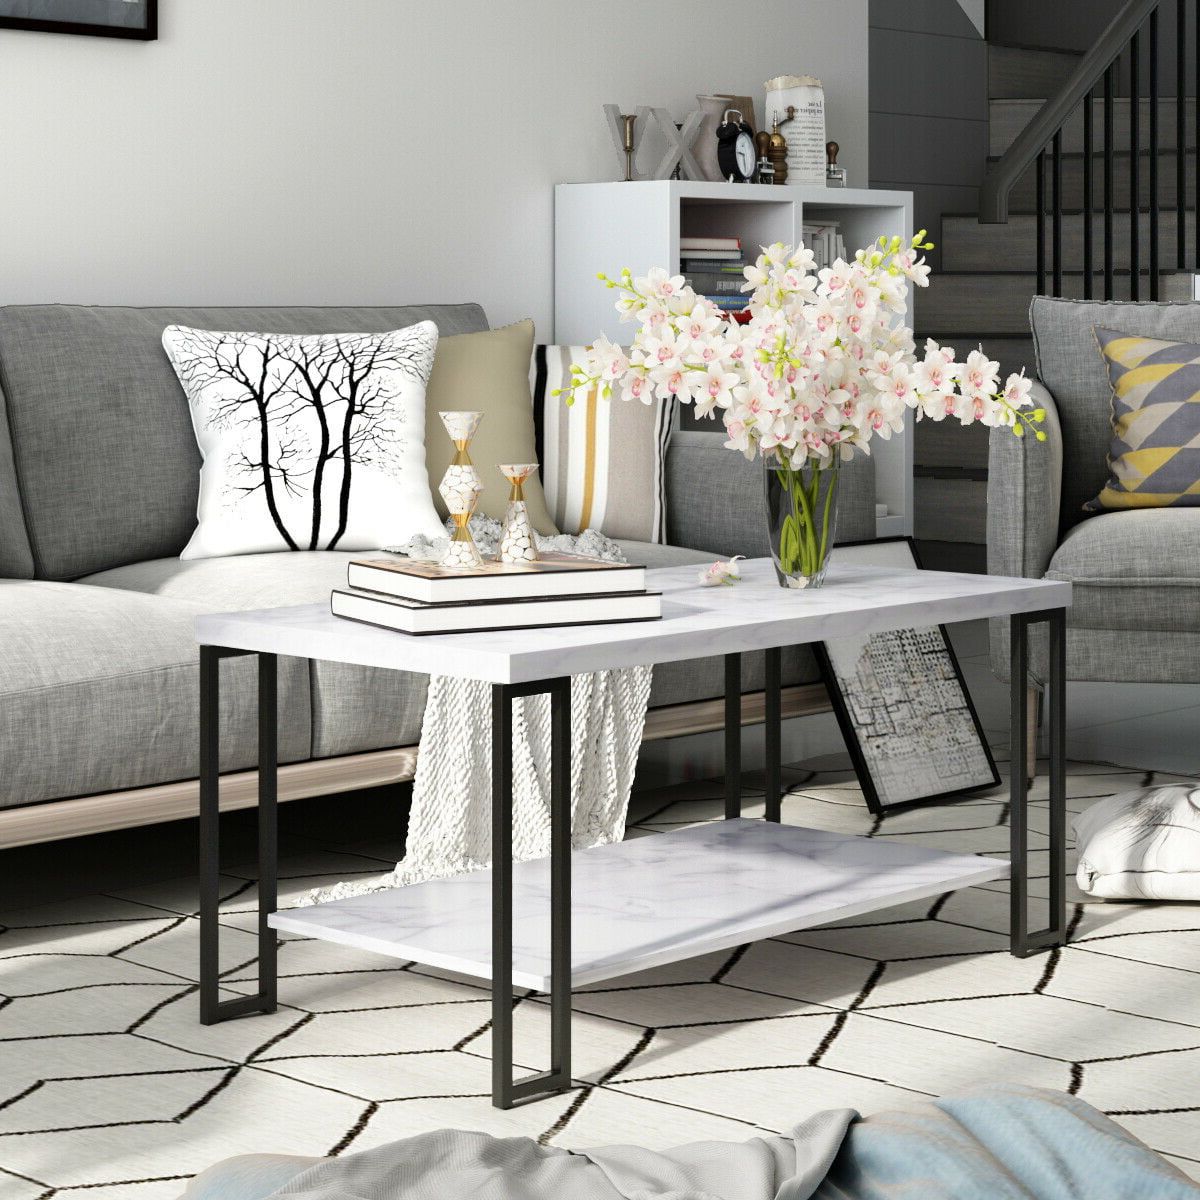 2019 2 Tier Metal Coffee Tables Throughout Zimtown 2 Tier Rectangular Coffee Table With Black Metal Frame And Hollow  Metal Legs For Living Room Accent Furniture Beside Sofa Cocktail Table –  Walmart (View 6 of 20)